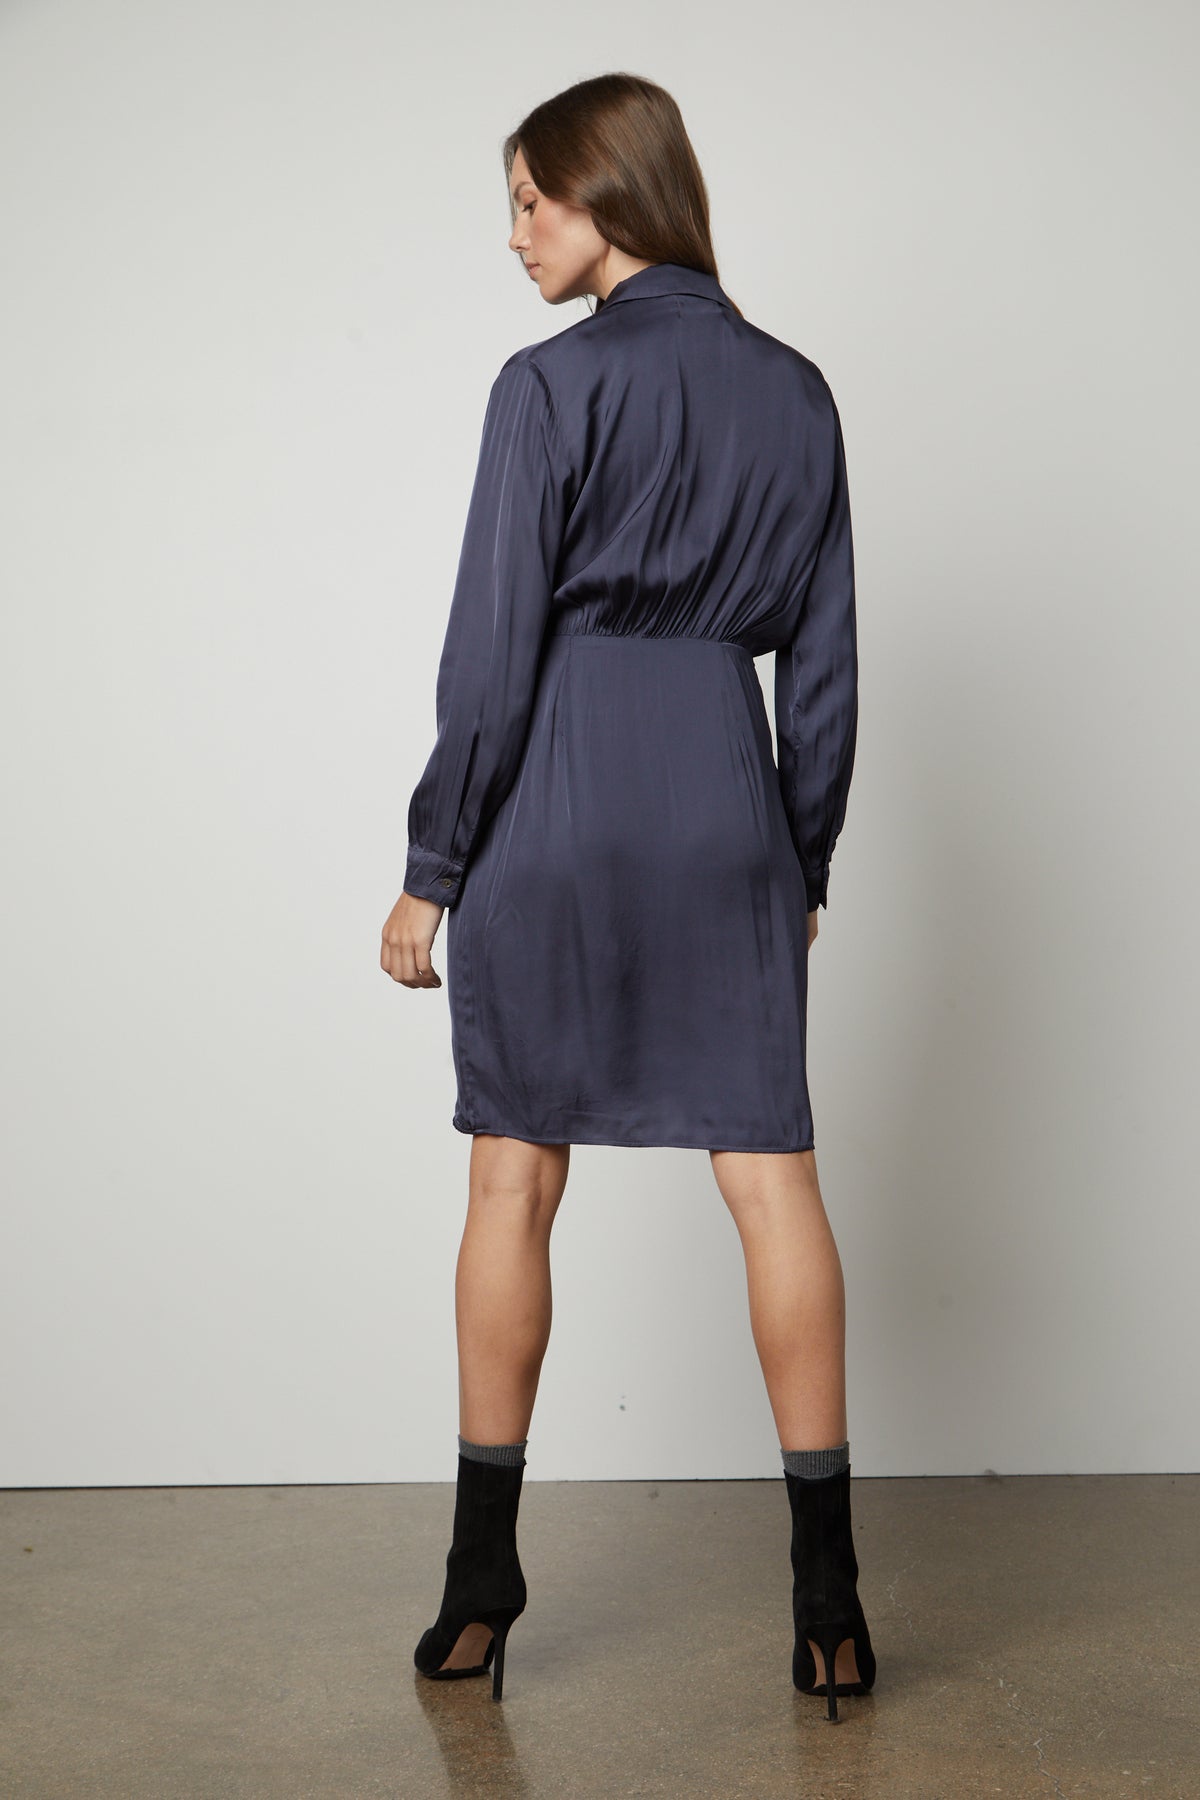 The back view of a woman wearing the Velvet by Graham & Spencer JUNI WRAP DRESS with v-neckline.-35656155300033